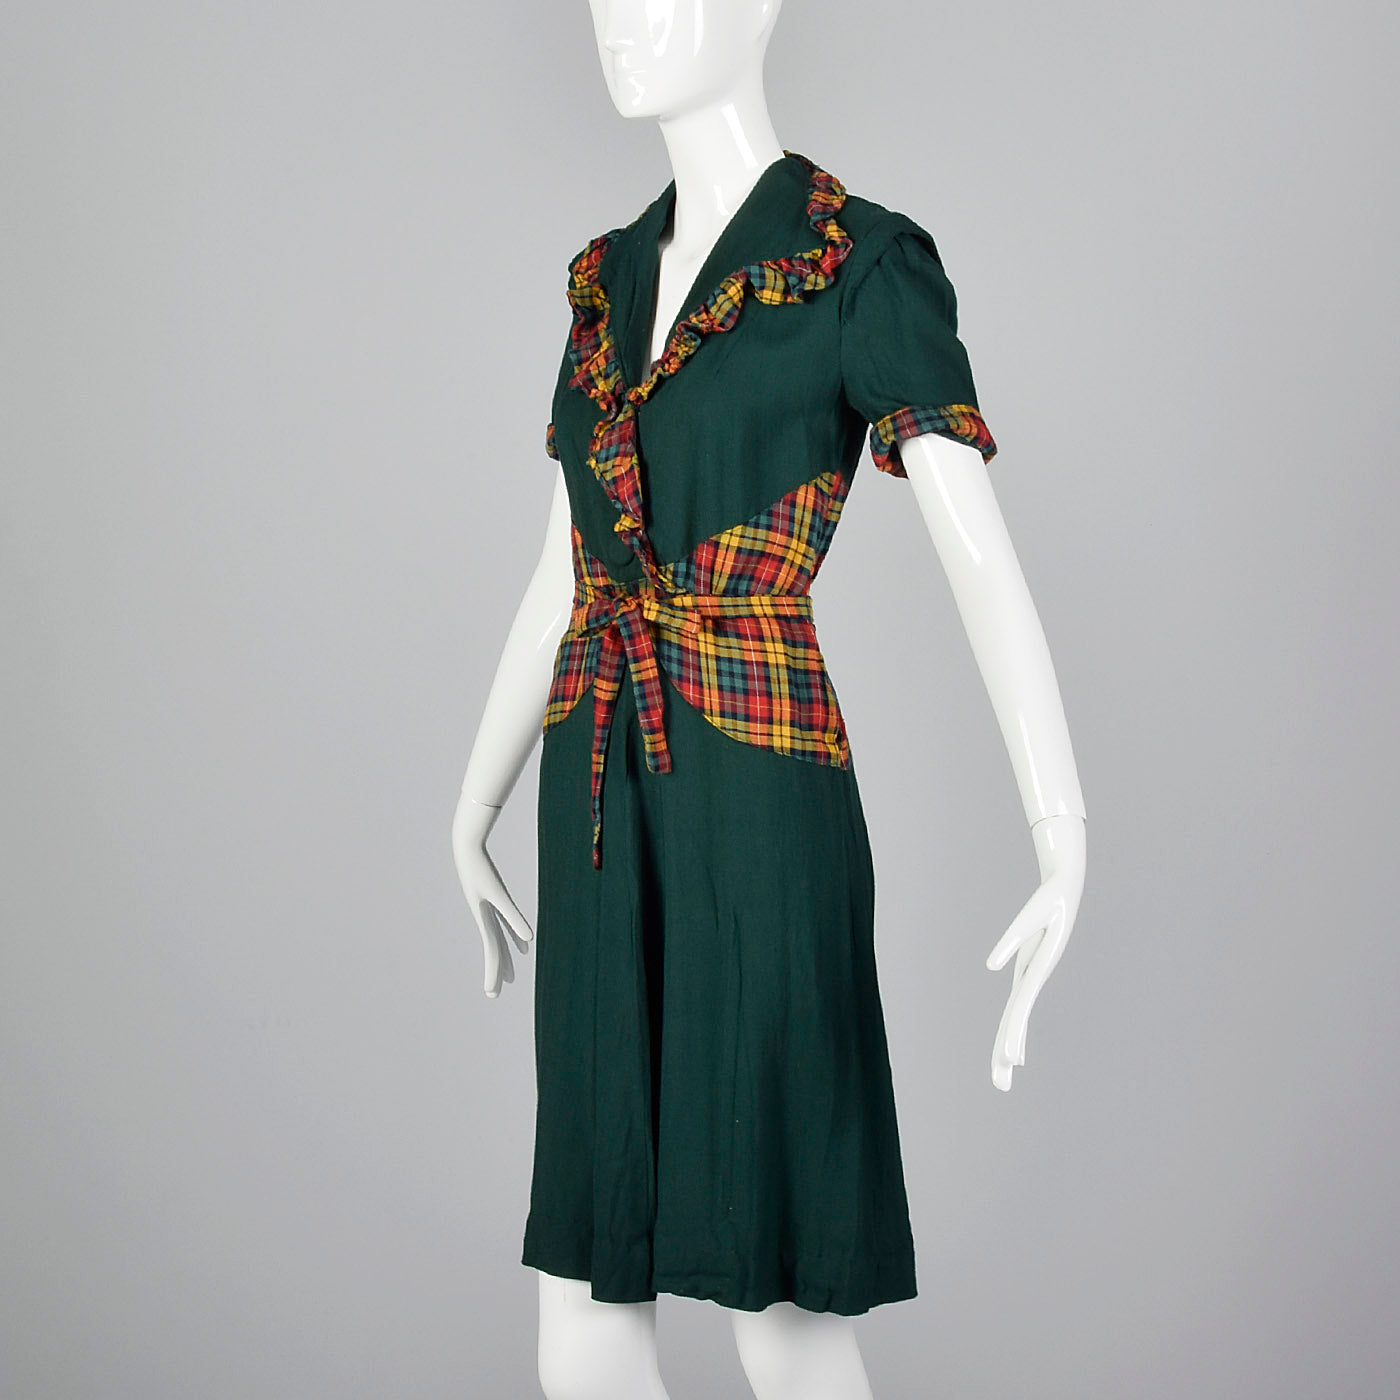 1930s Green Dress with Colorful Plaid Trim